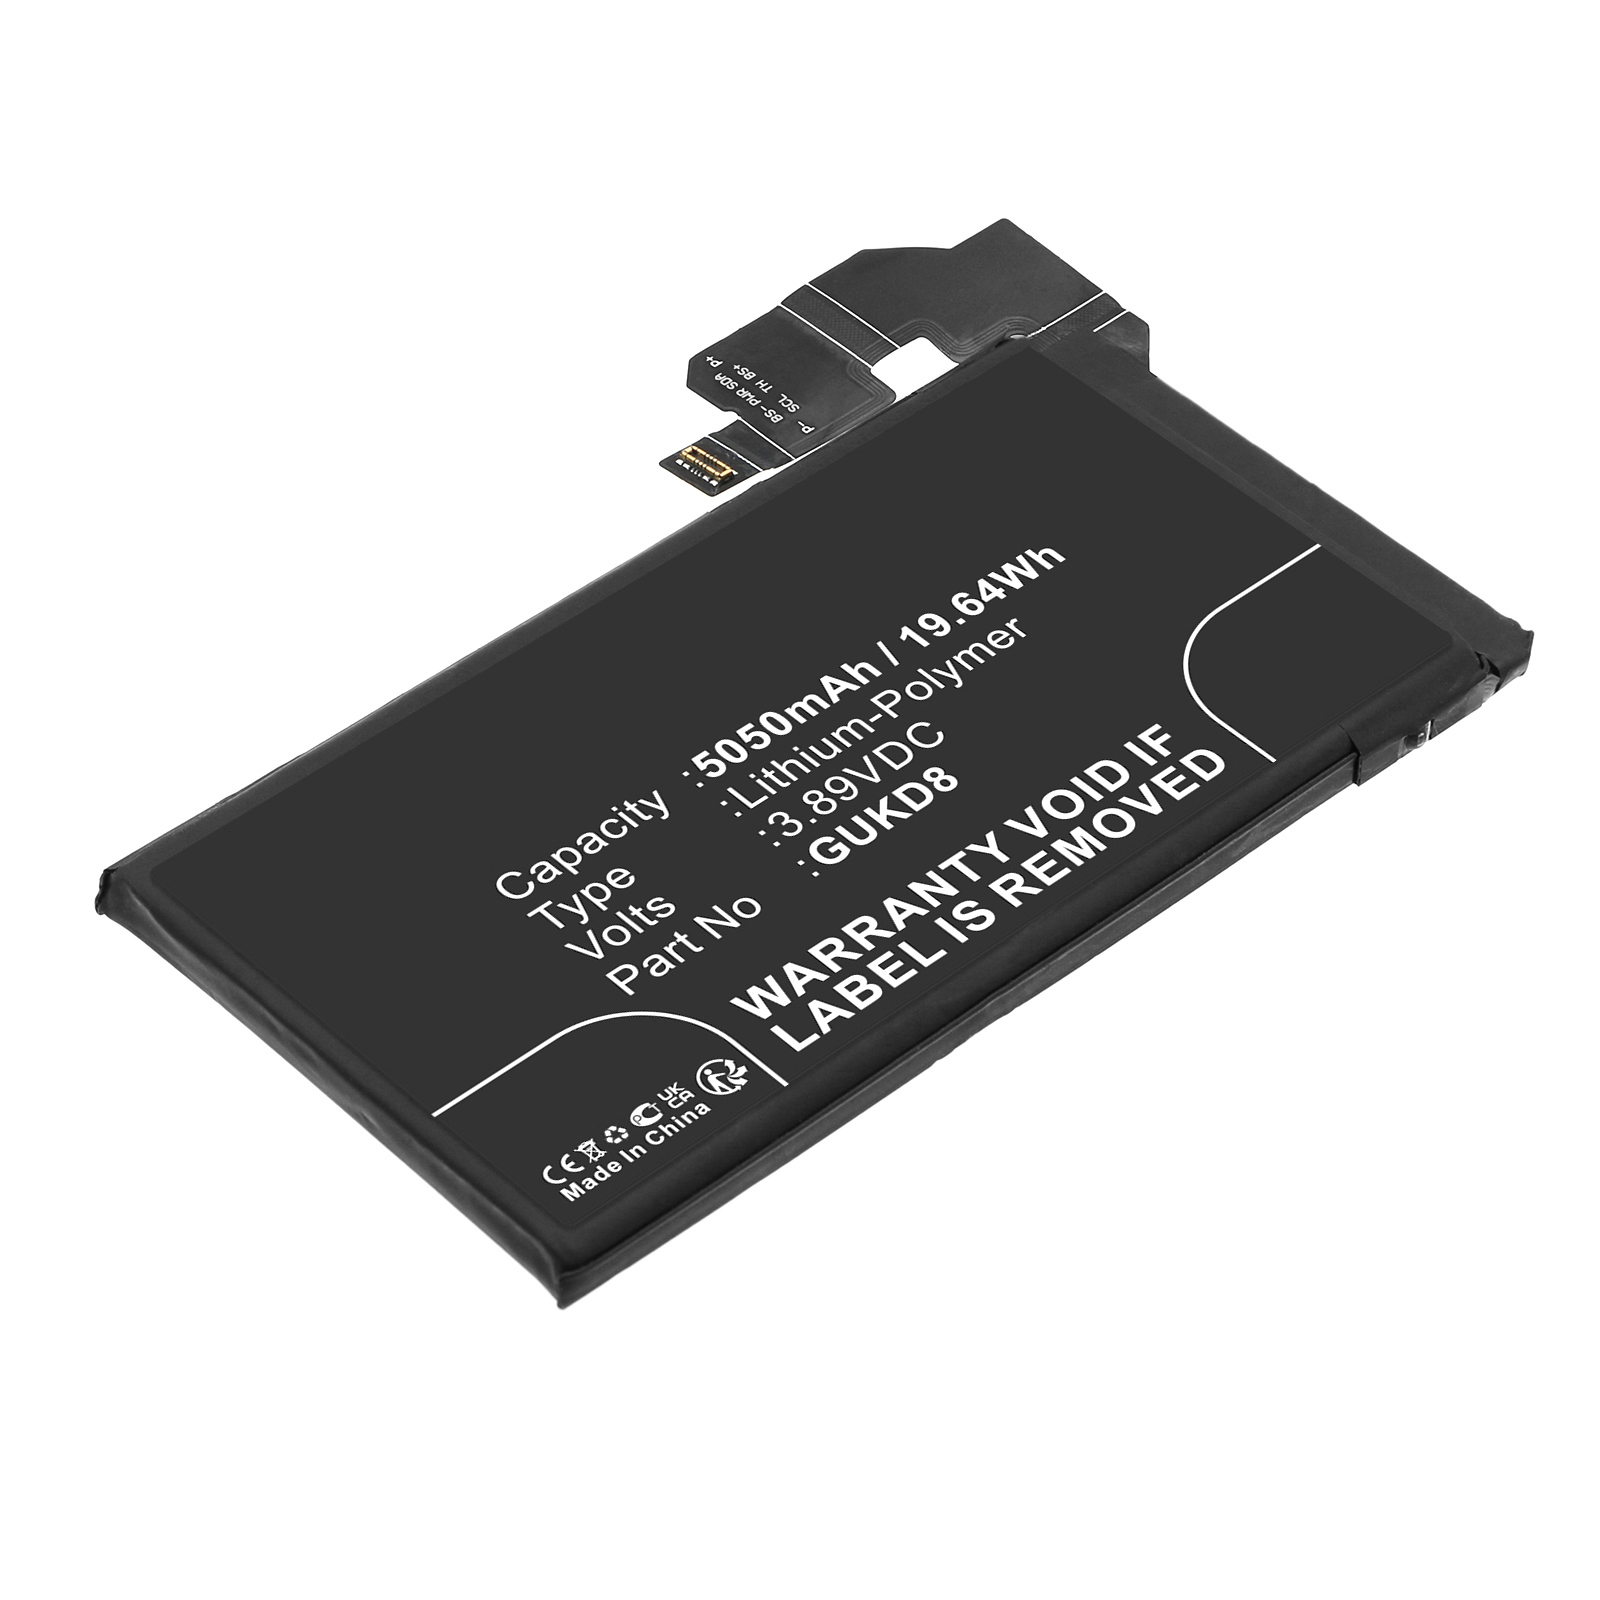 Synergy Digital Cell Phone Battery, Compatible with Google G949-00704-01 Cell Phone Battery (Li-Pol, 3.89V, 5050mAh)